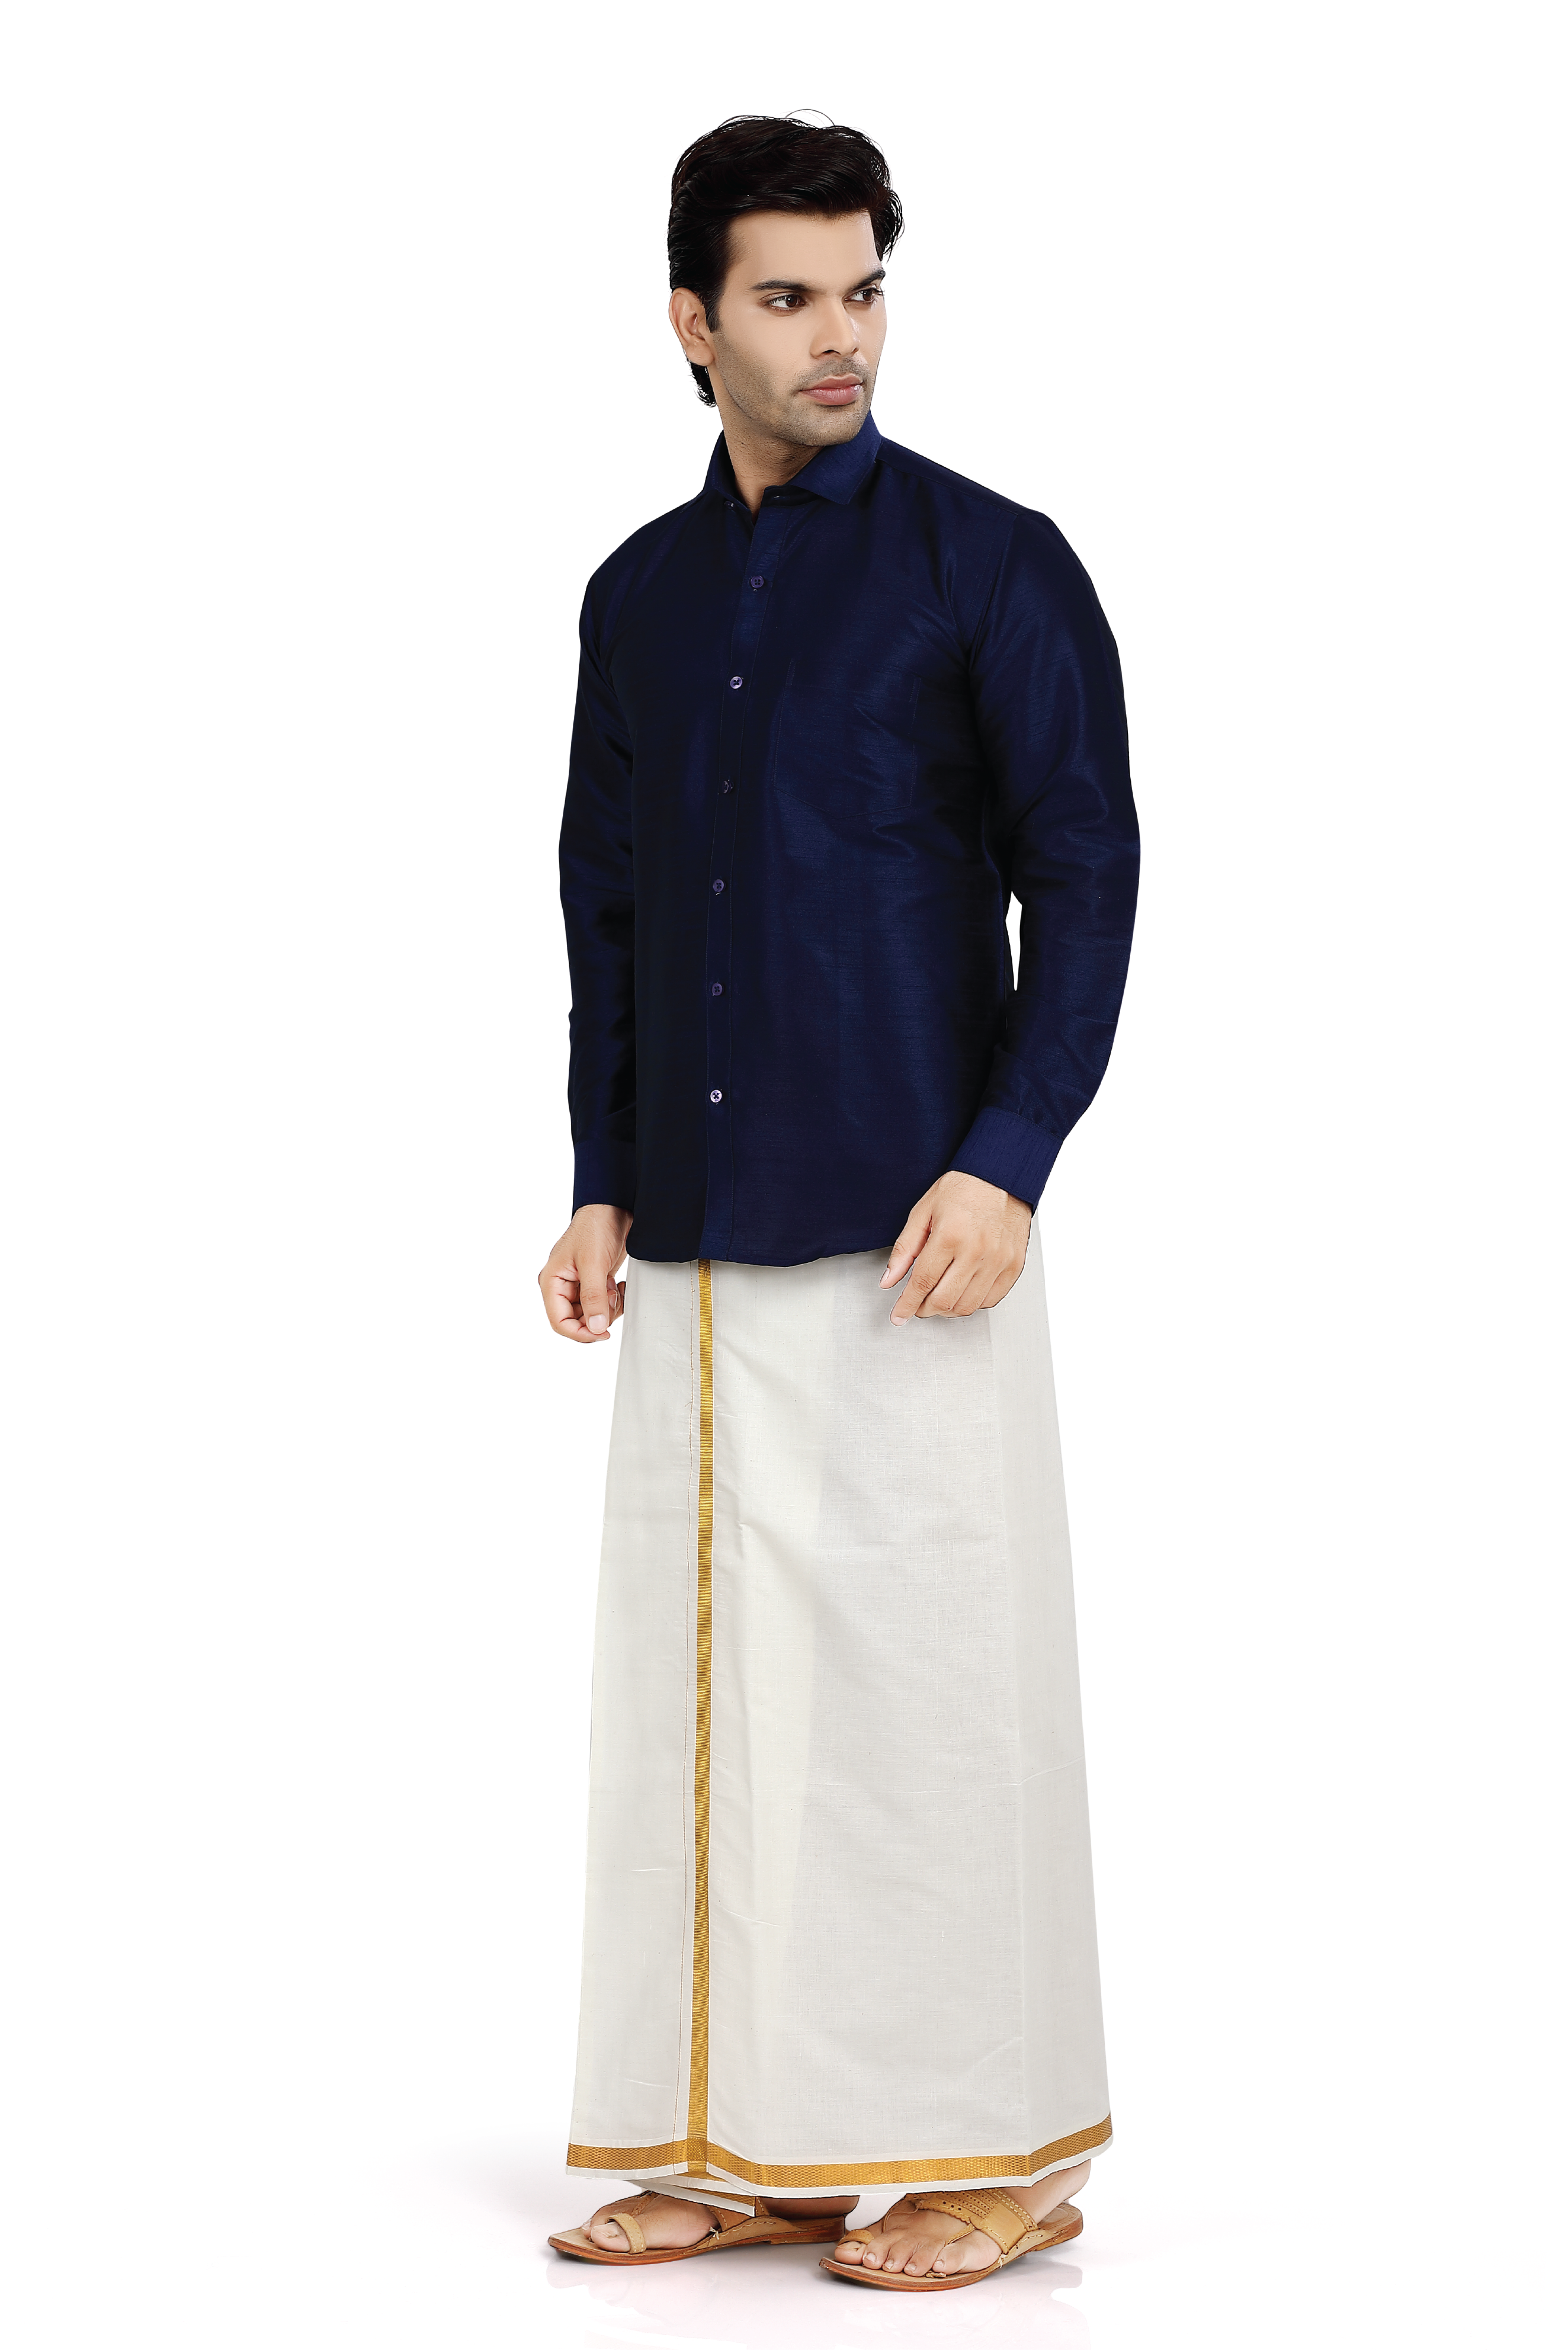 395 Dhoti Shirt Images, Stock Photos, 3D objects, & Vectors